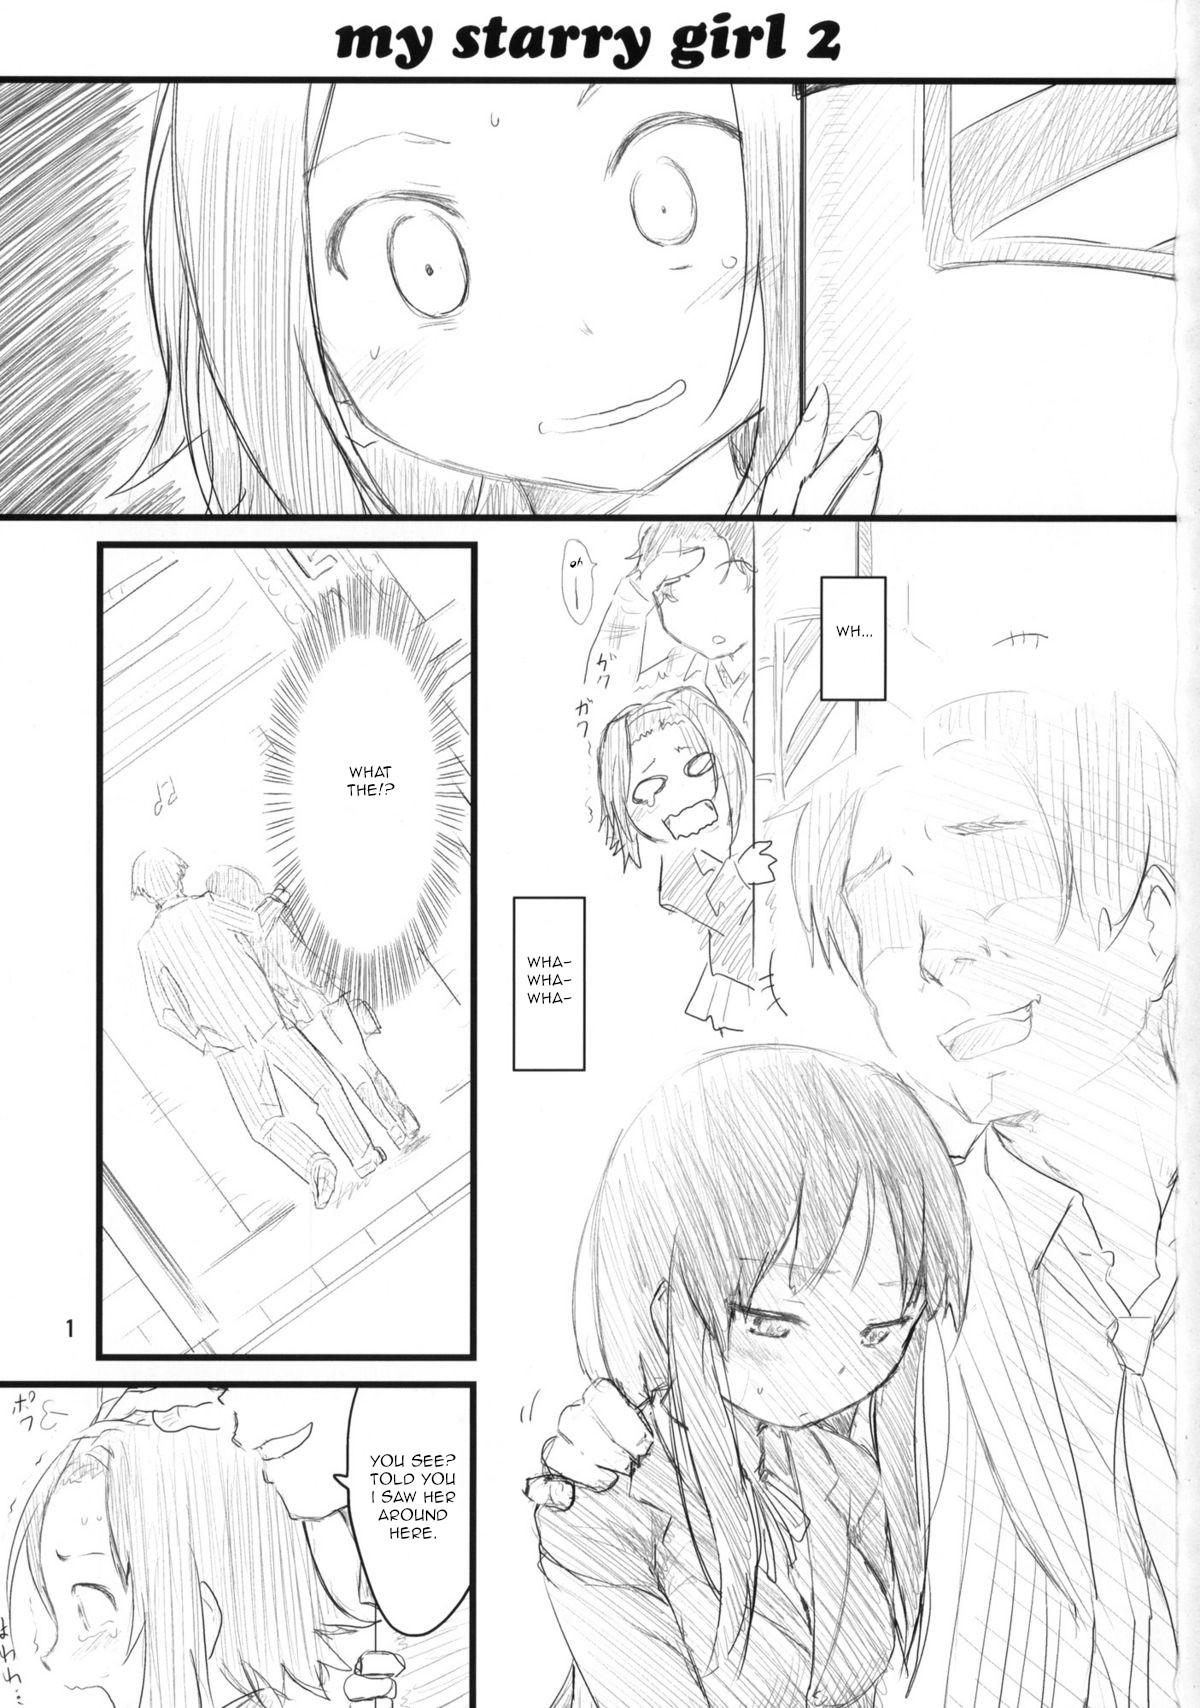 Students MY STARRY GIRL 2 - K-on Rough - Page 2